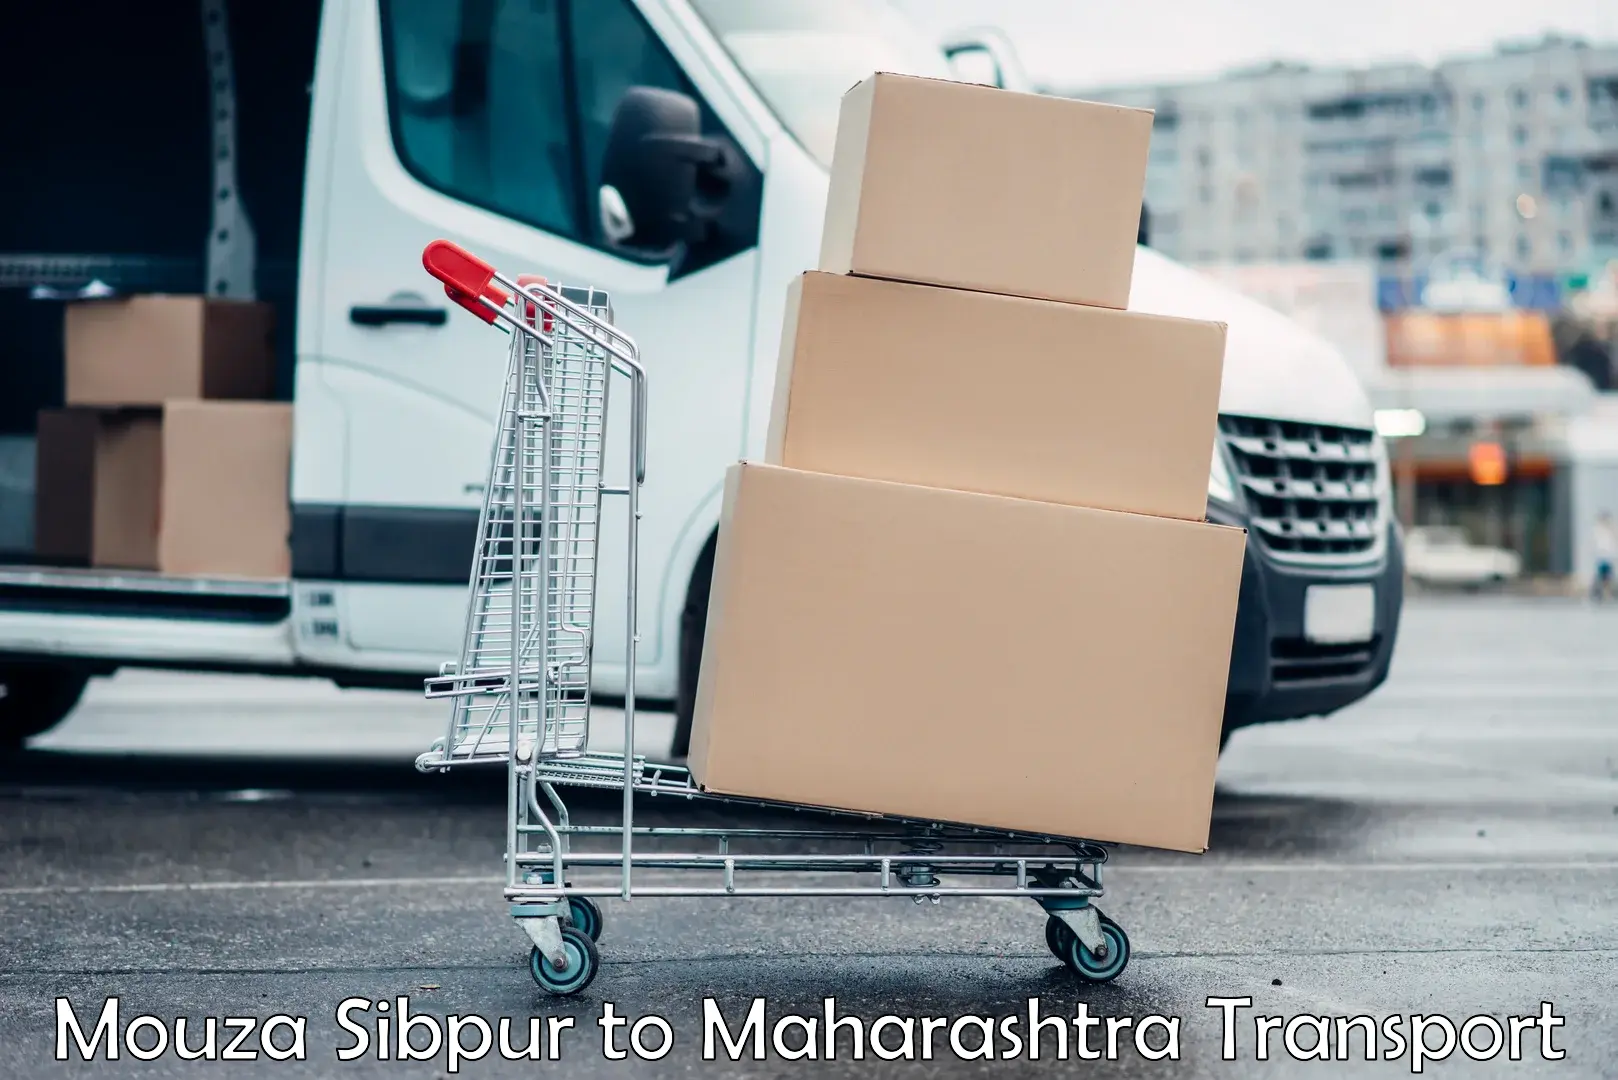 Package delivery services Mouza Sibpur to Lonar